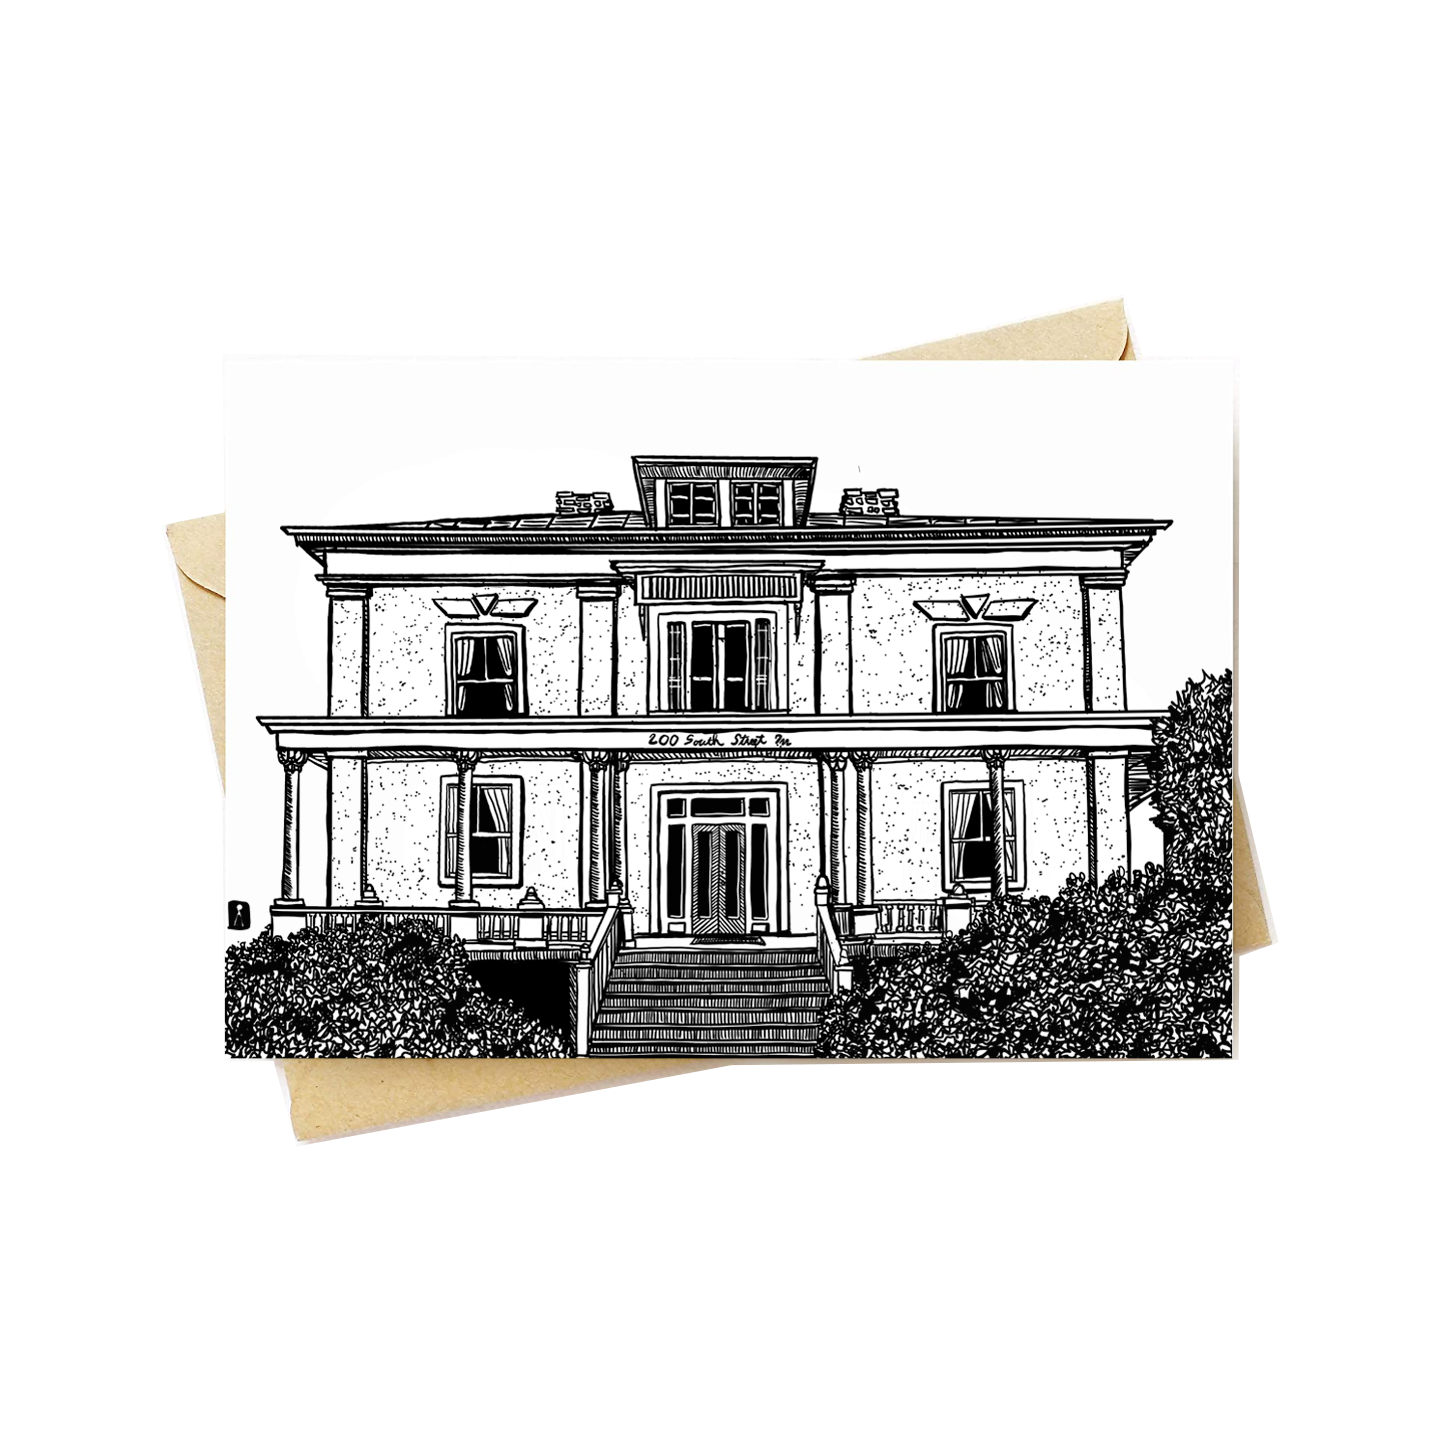 BellavanceInk: Greeting Card With A Pen & Ink Drawing Of 200 South Street Inn, Charlottesville 5 x 7 Inches